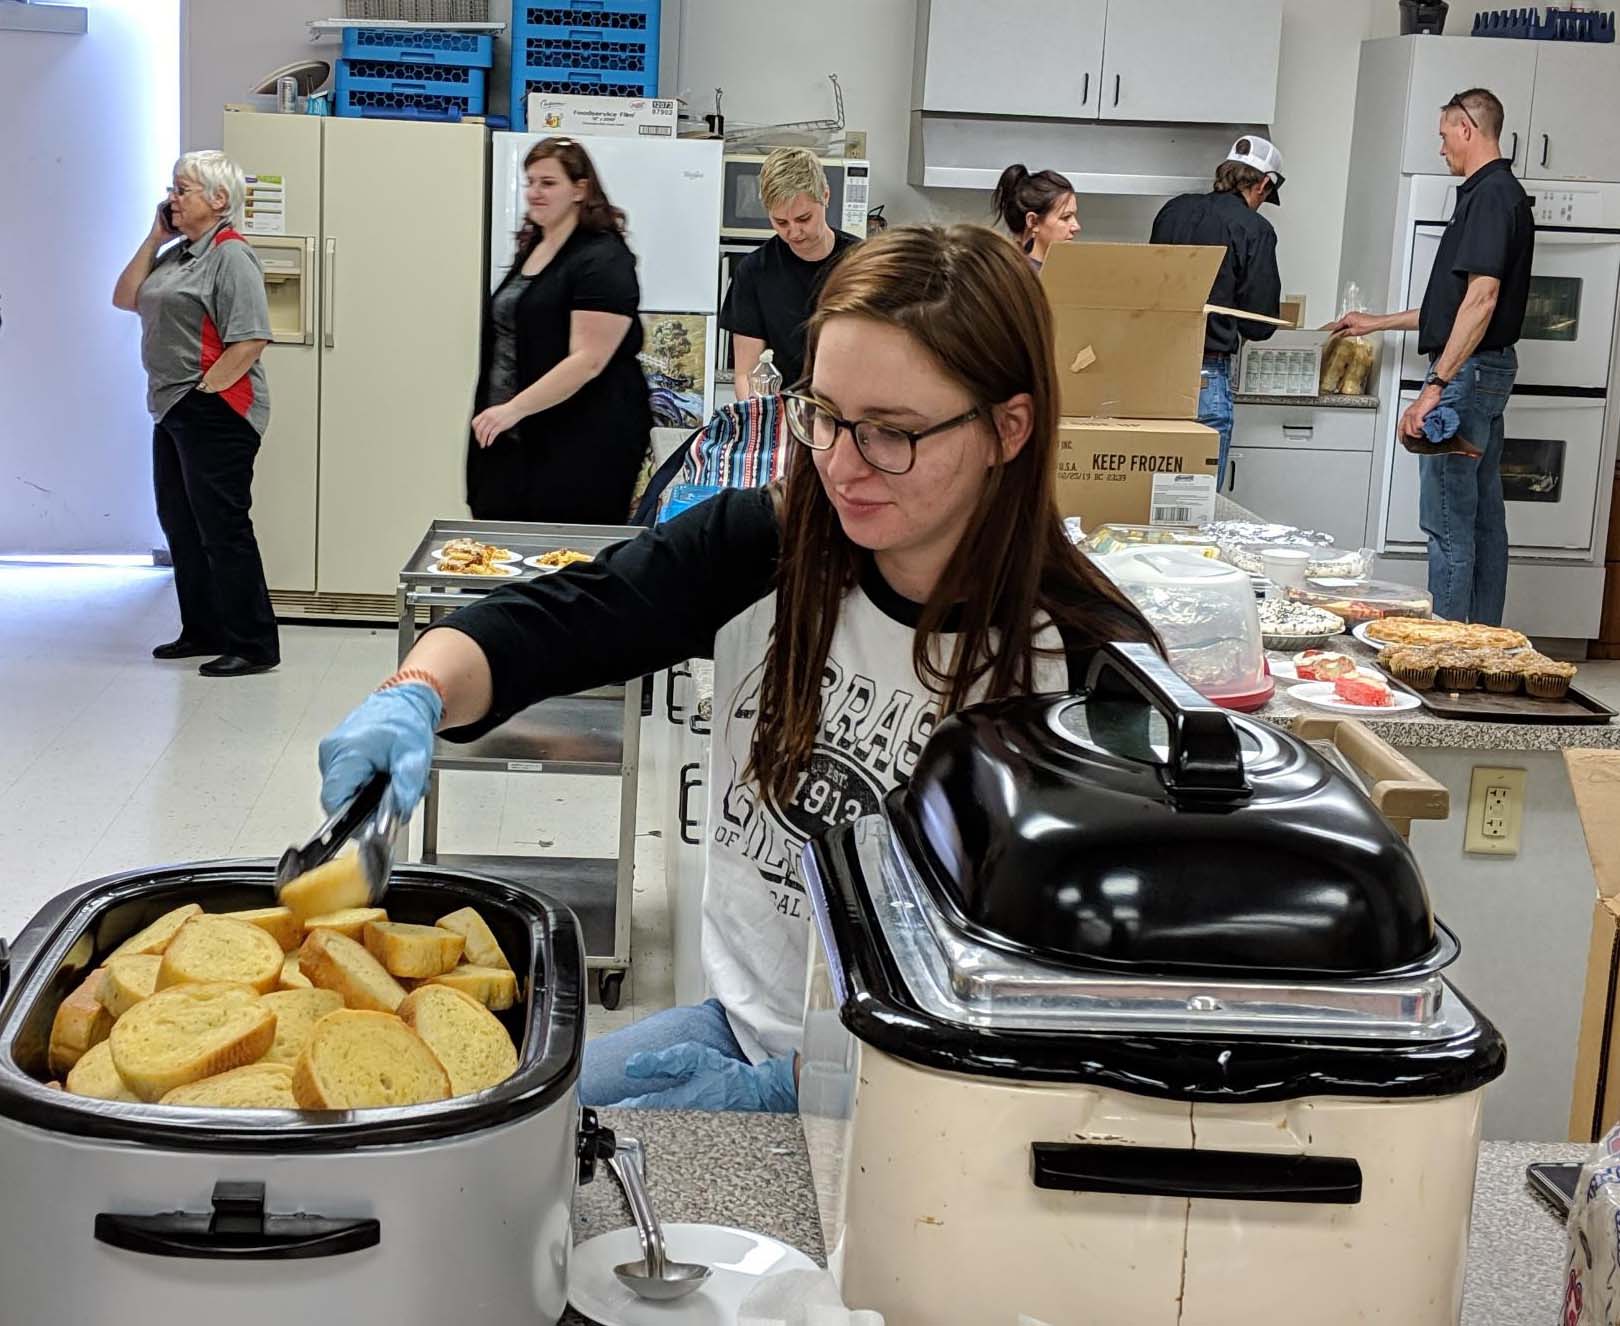 NCTA student Sadie Christensen of Arnold serves food at the NCTA pasta benefit in Curtis on March 26.  (Meredith Cable / NCTA photo) 